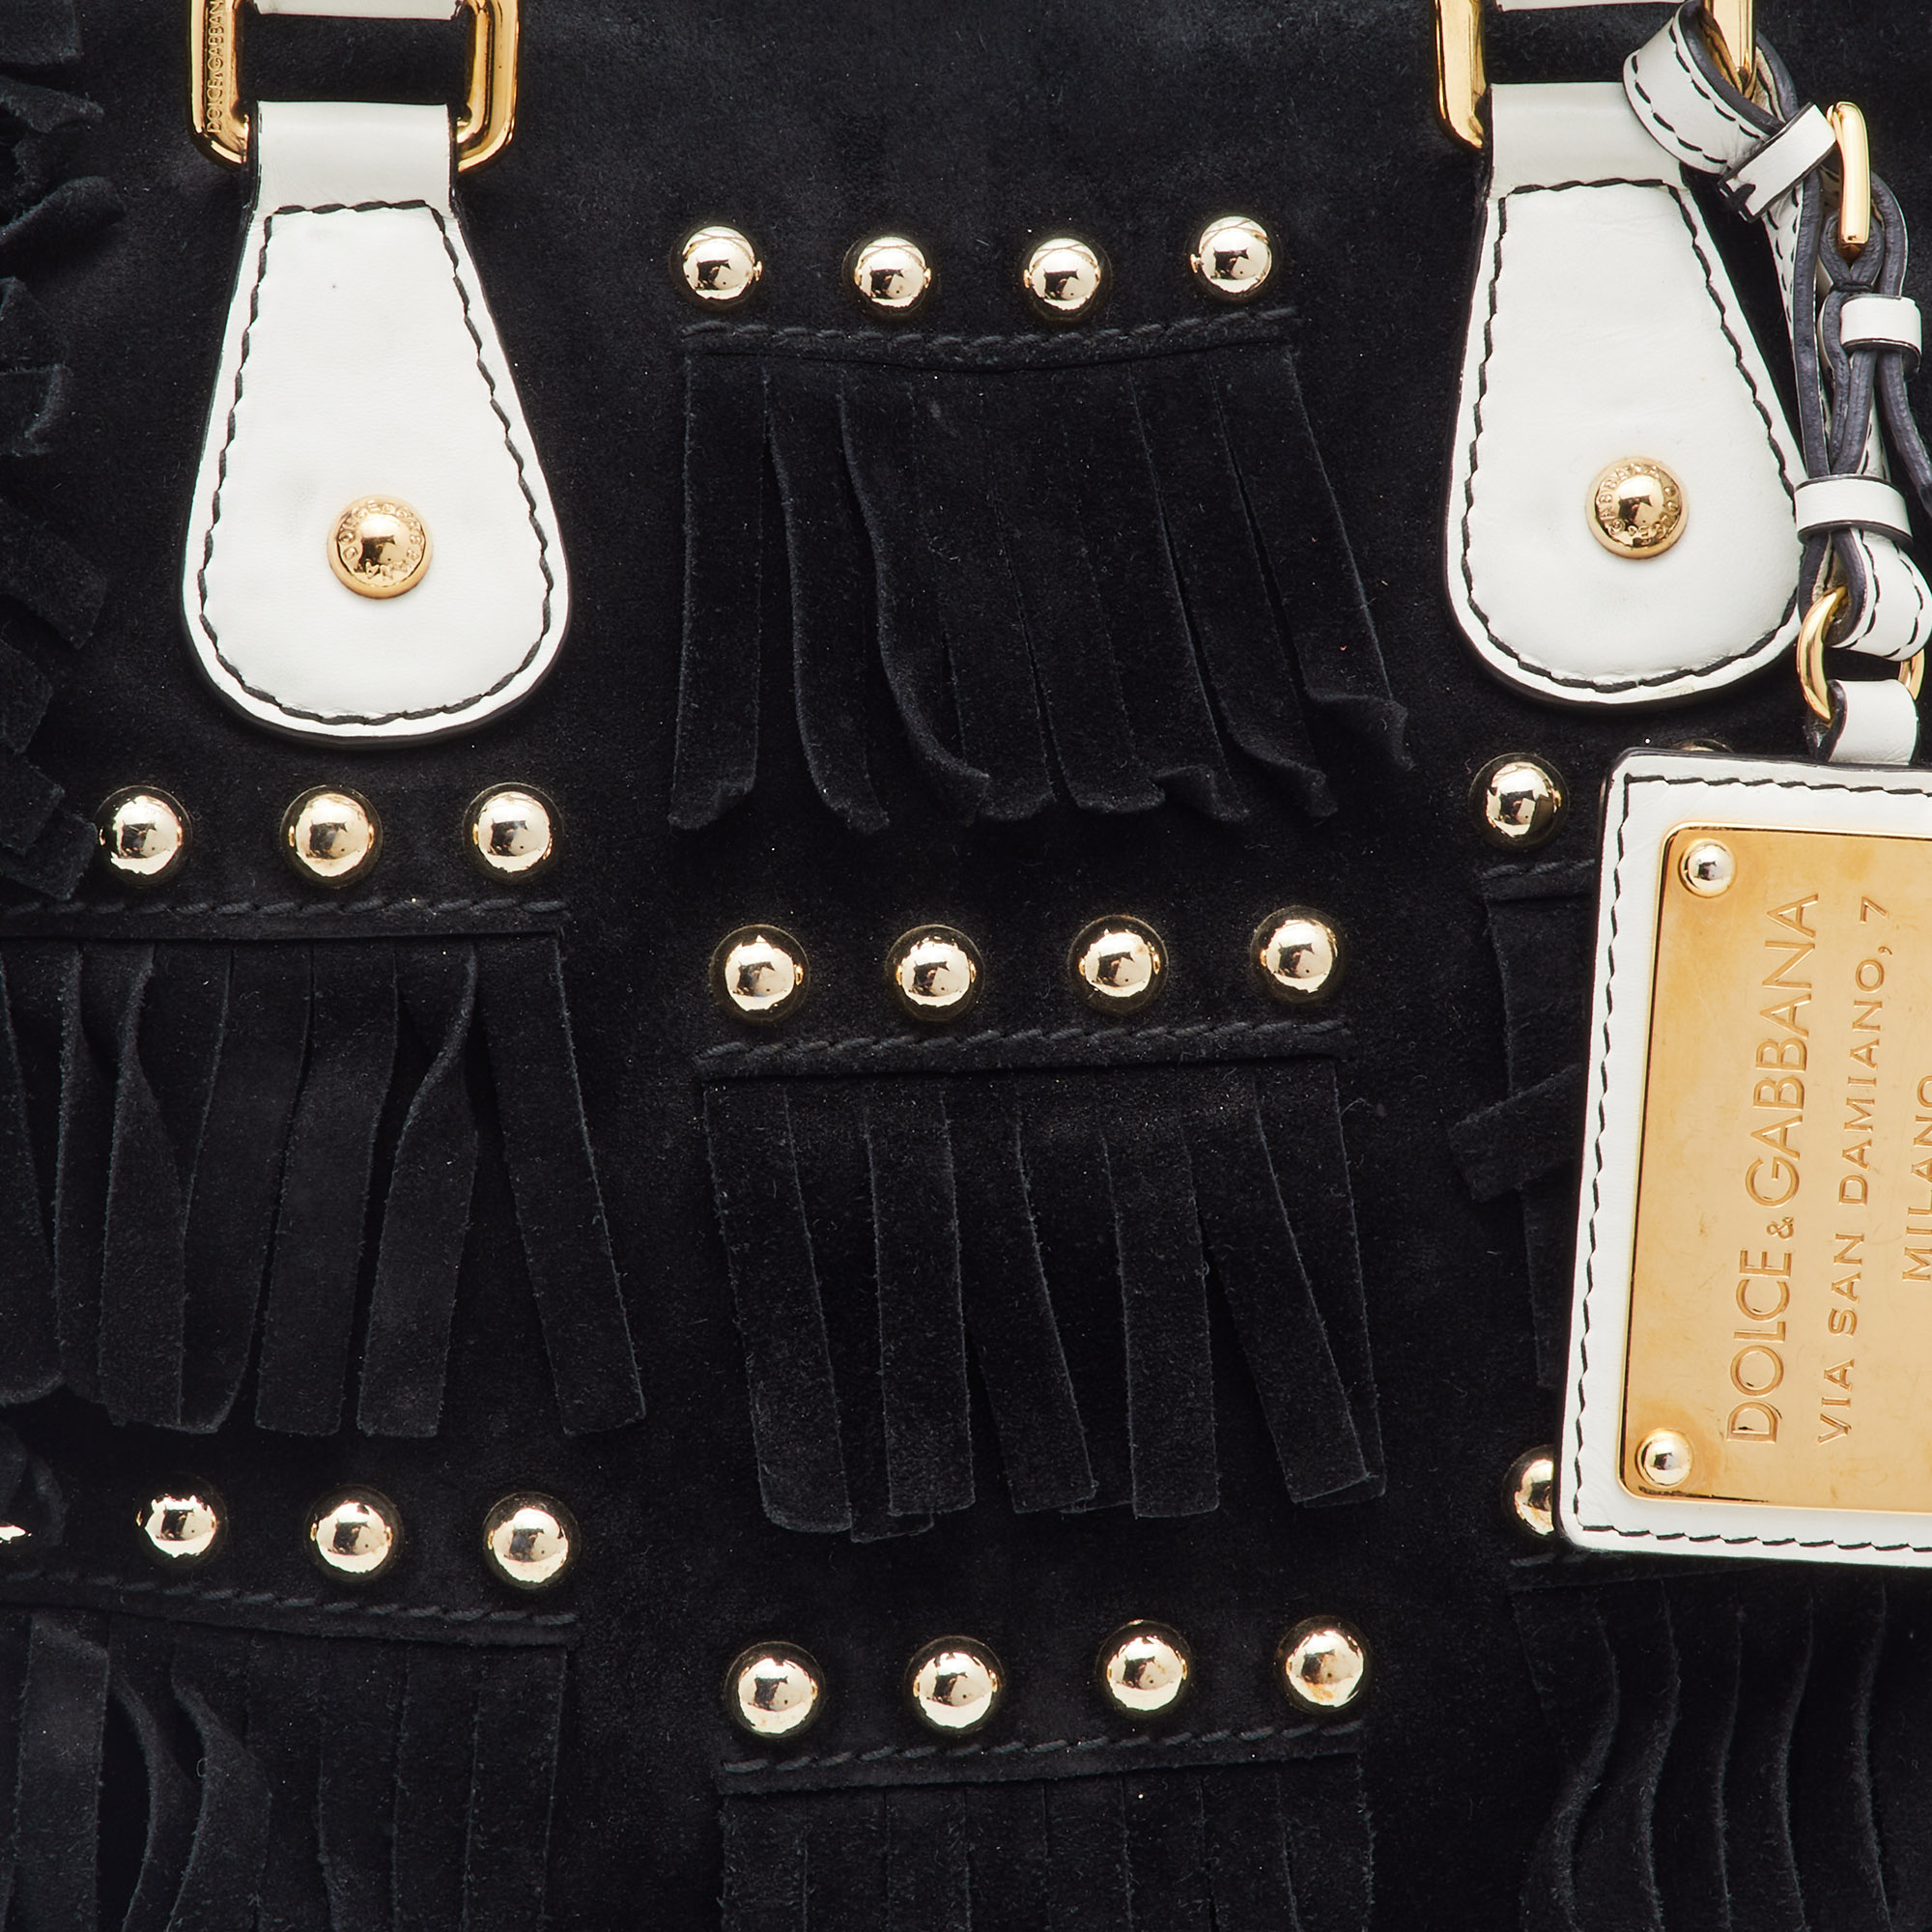 Dolce & Gabbana Black Suede And Leather Fringed Satchel